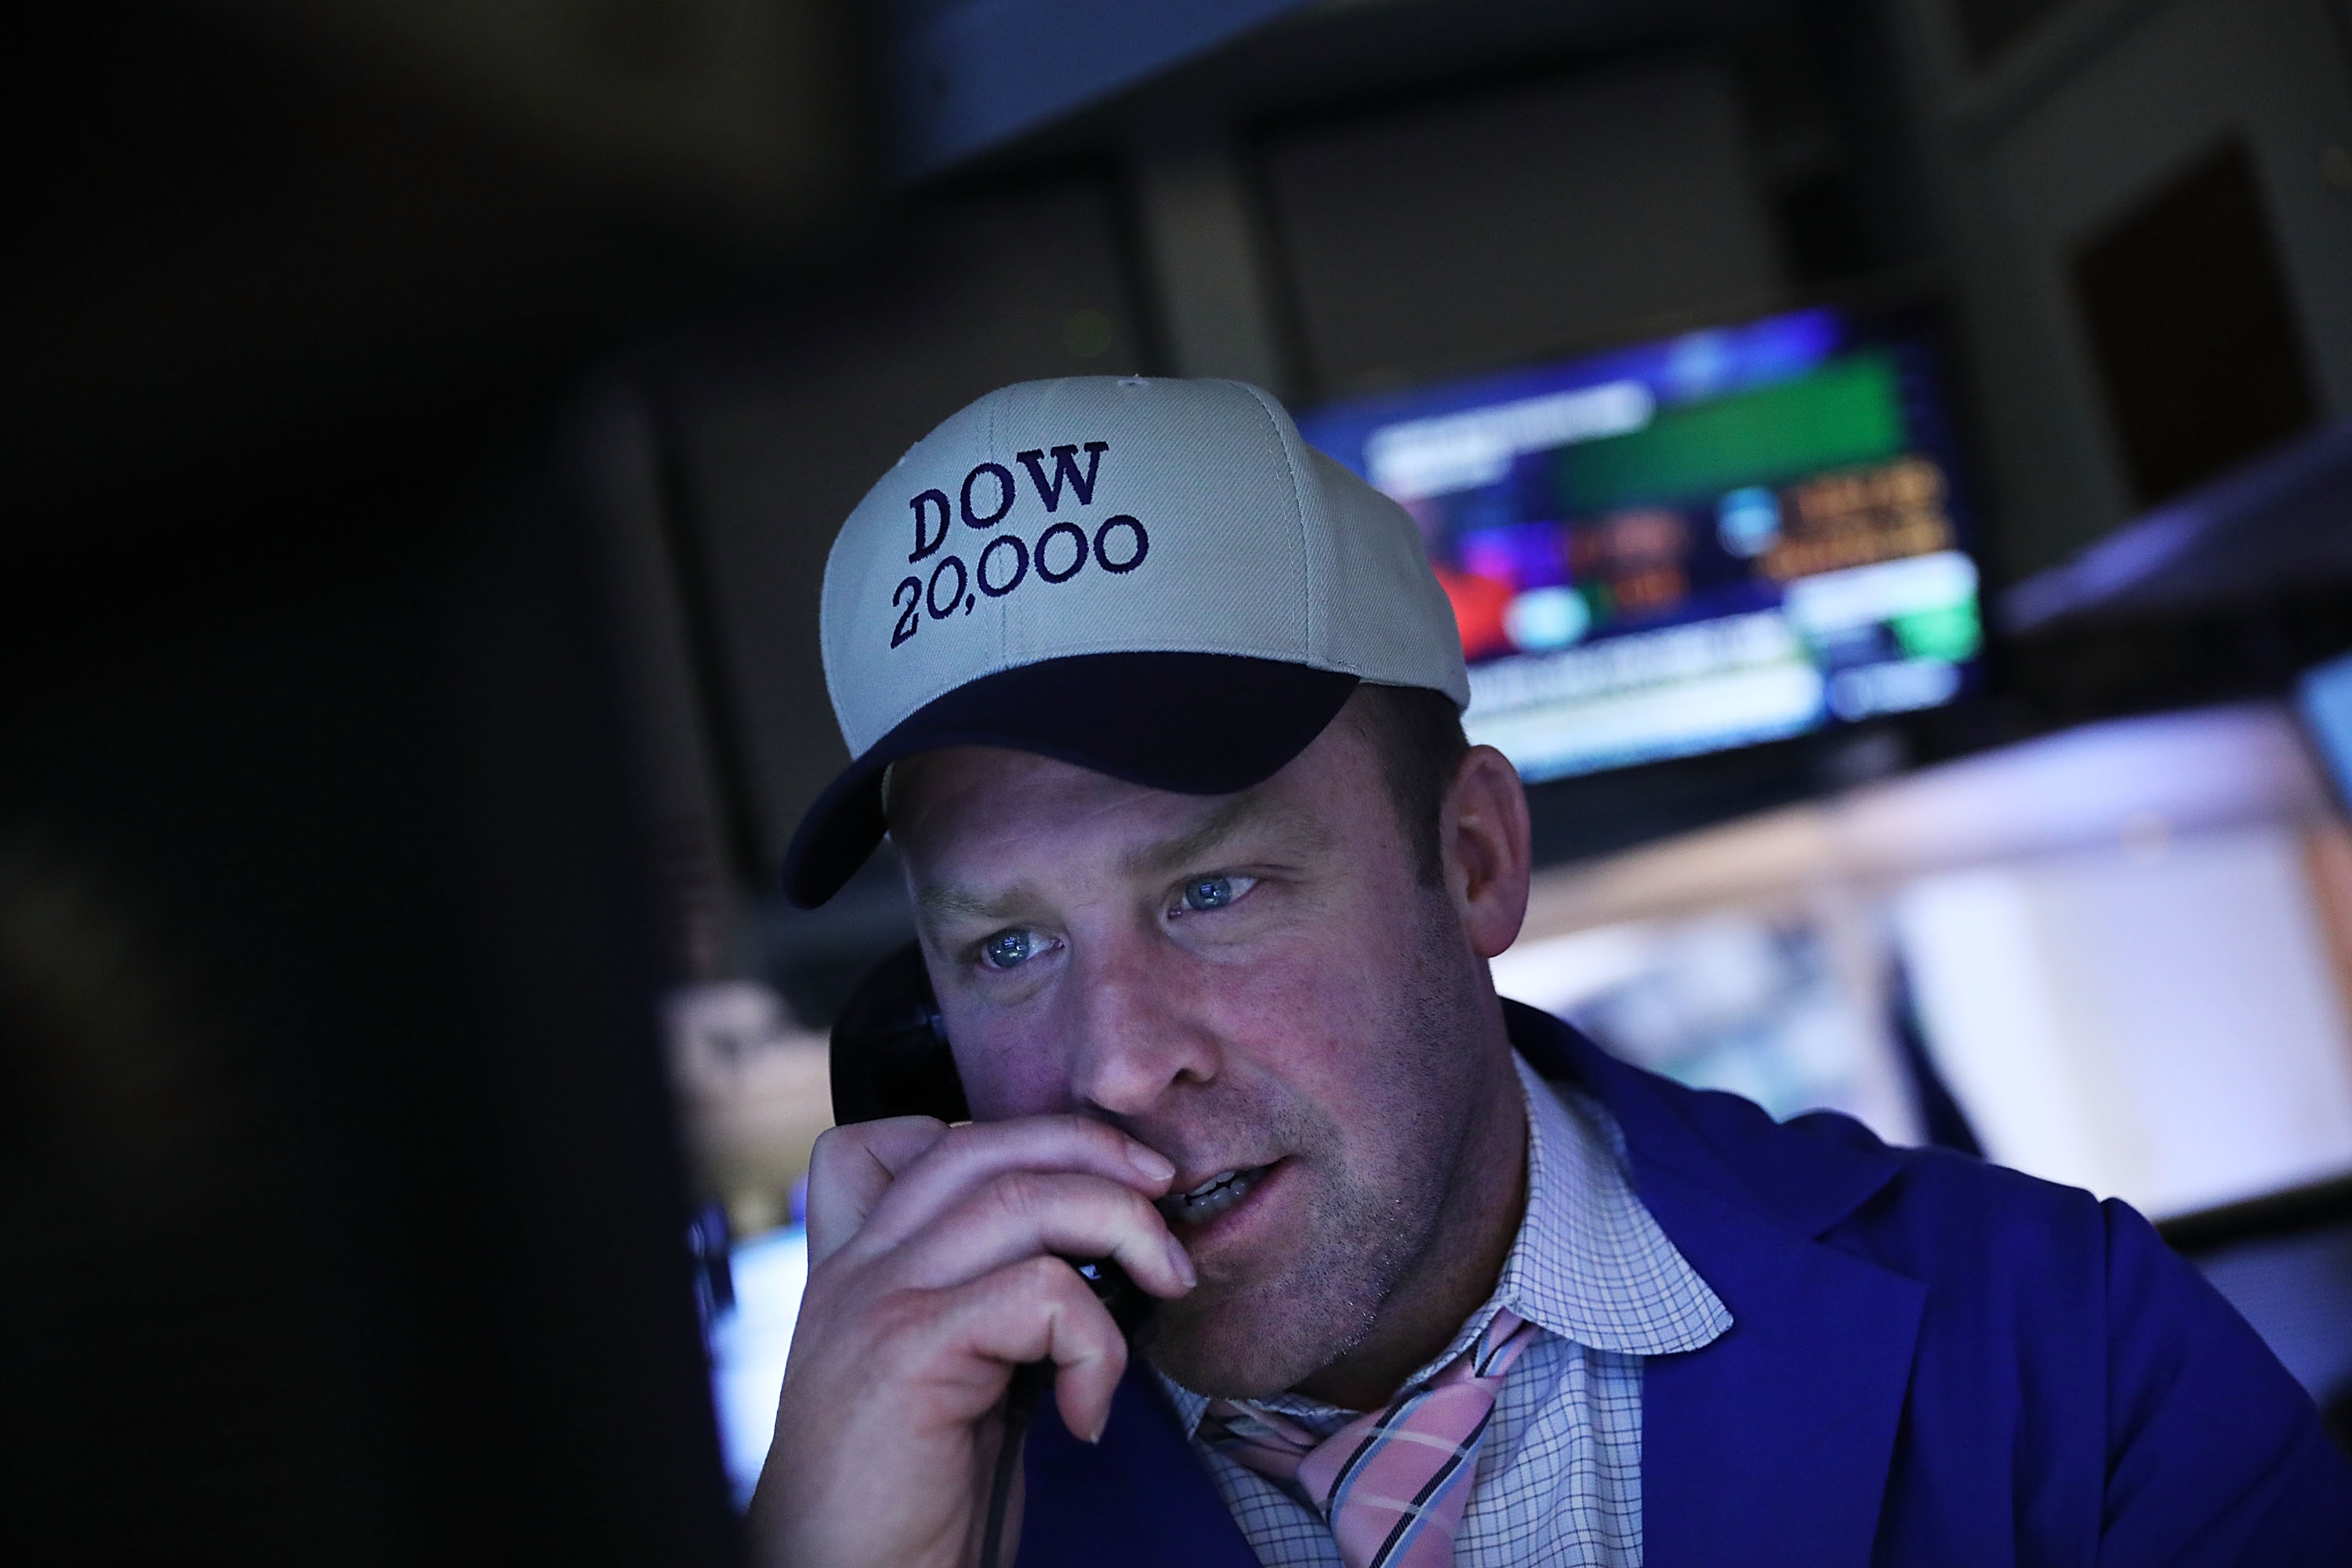 Dow Jones Industrials Average Crosses 20,000 Mark For The First Time